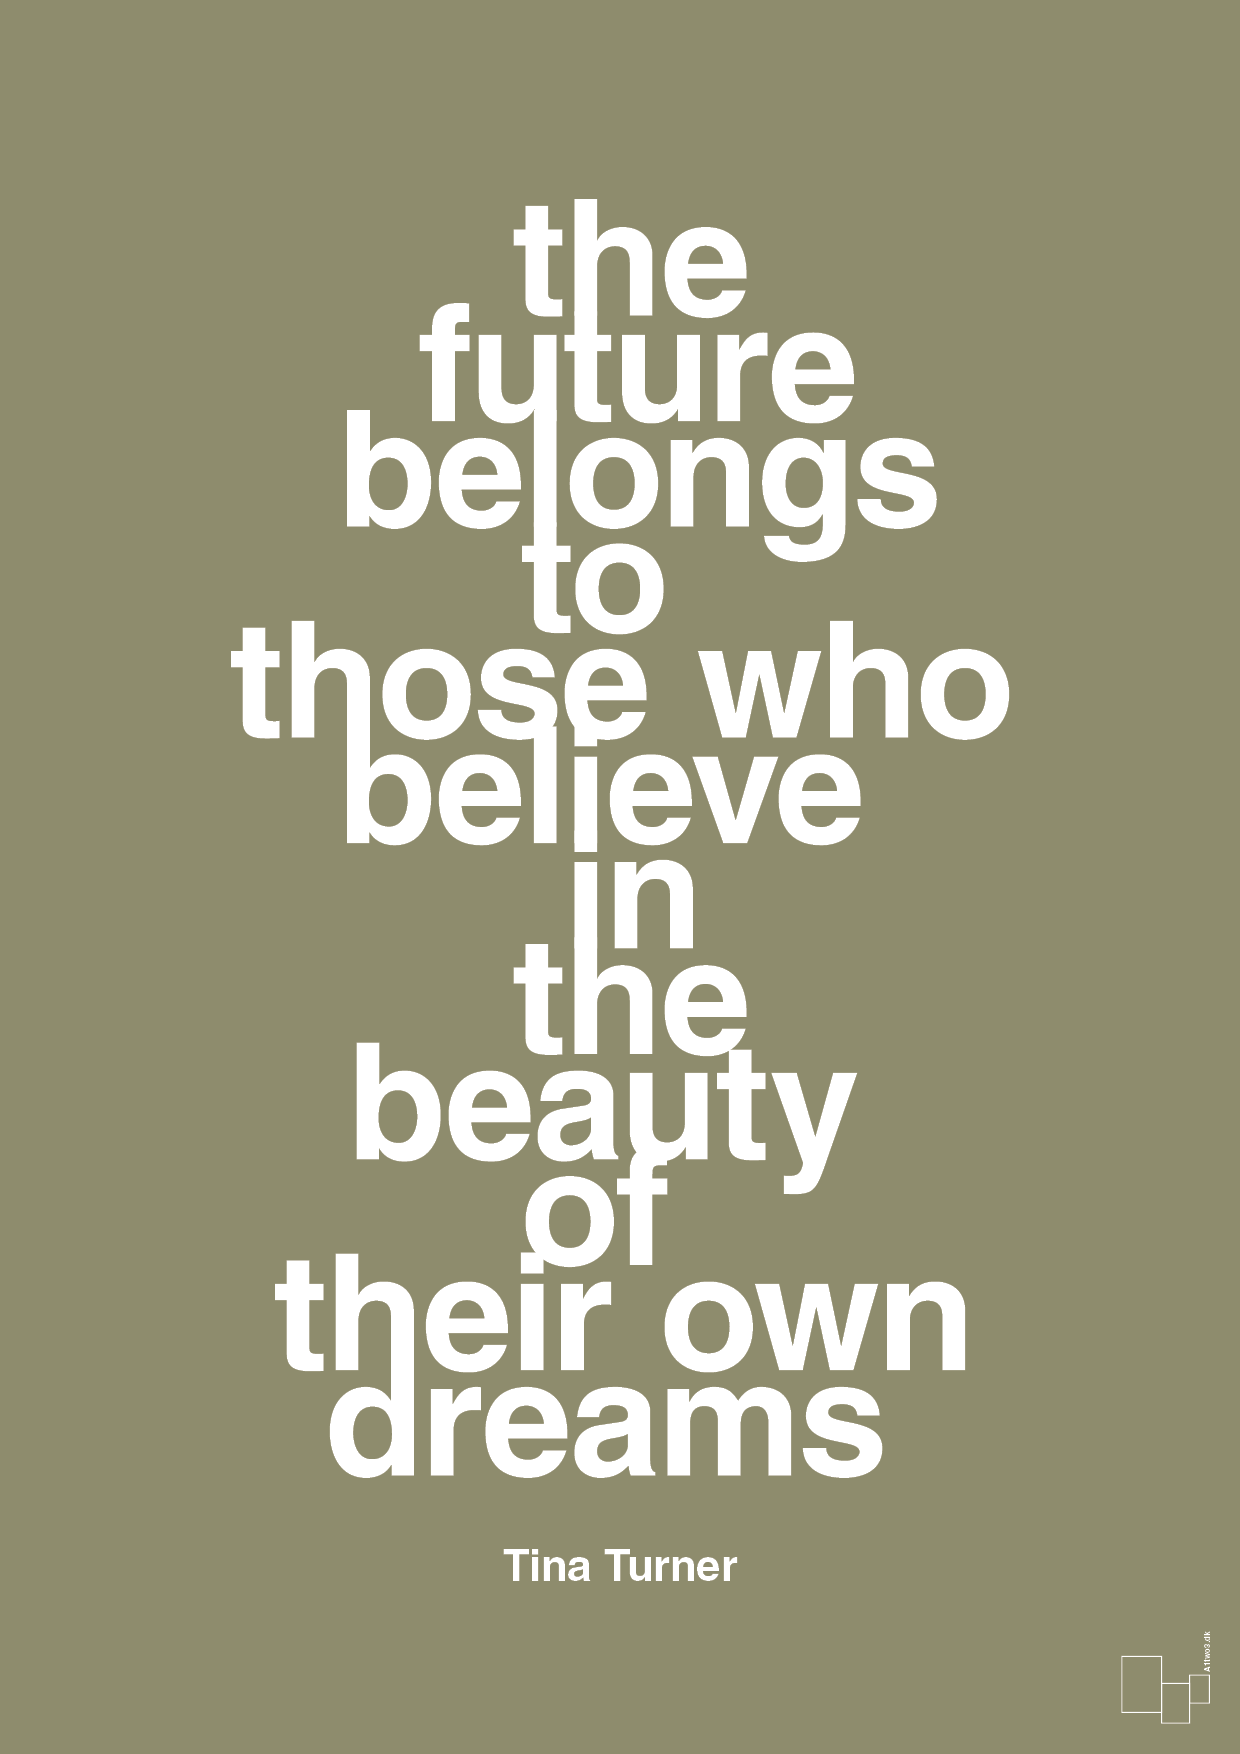 the future belongs to those who believe in the beauty of their own dreams - Plakat med Citater i Misty Forrest